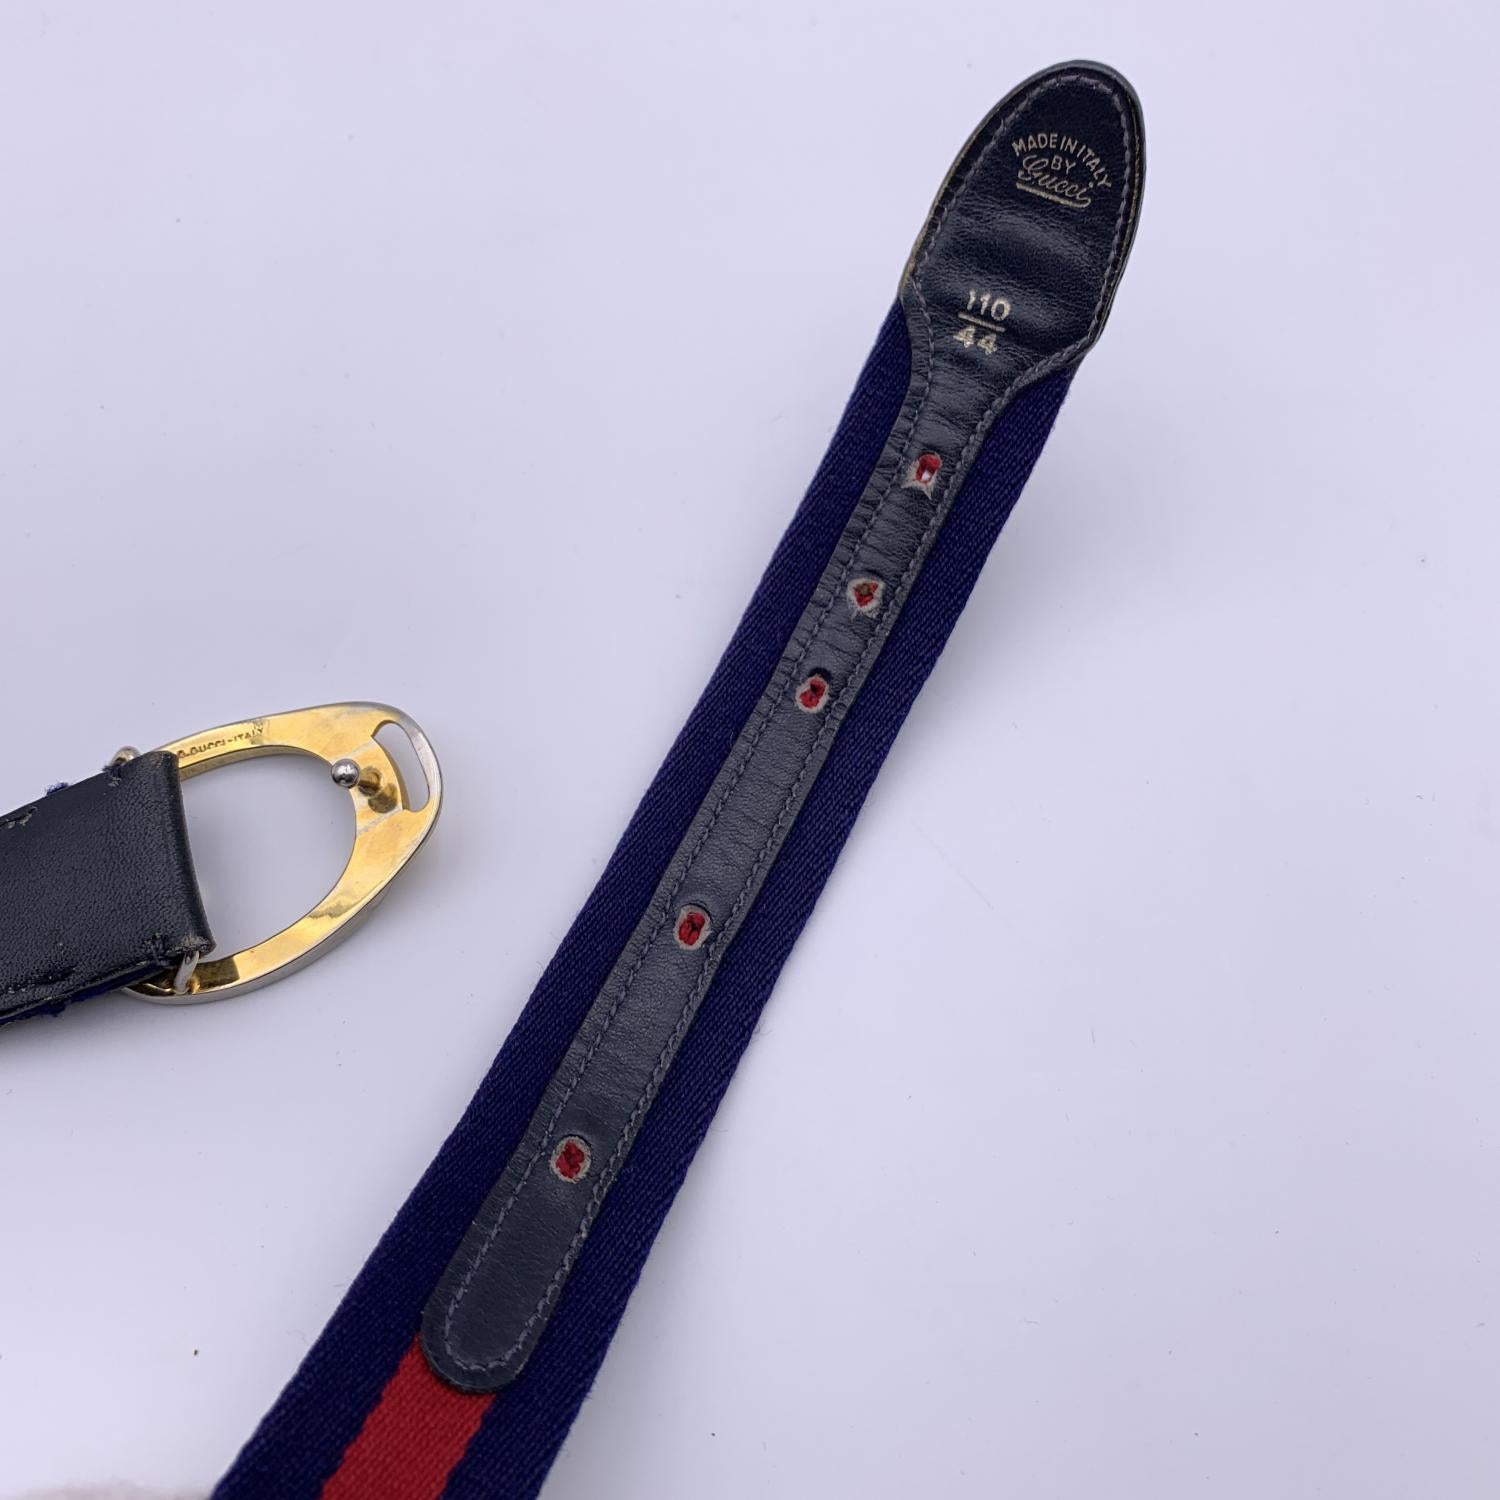 Vintage Gucci Unisex Web belt. Crafted in blue/red/blue canvas with blue genuine leather parts and gold metal buckle. 5 holes adjustment. Size: 110/44. Height: 1.25 inches - 3.2 cm. Total length : 44.5 inches - 113 cm (buckle included). Max